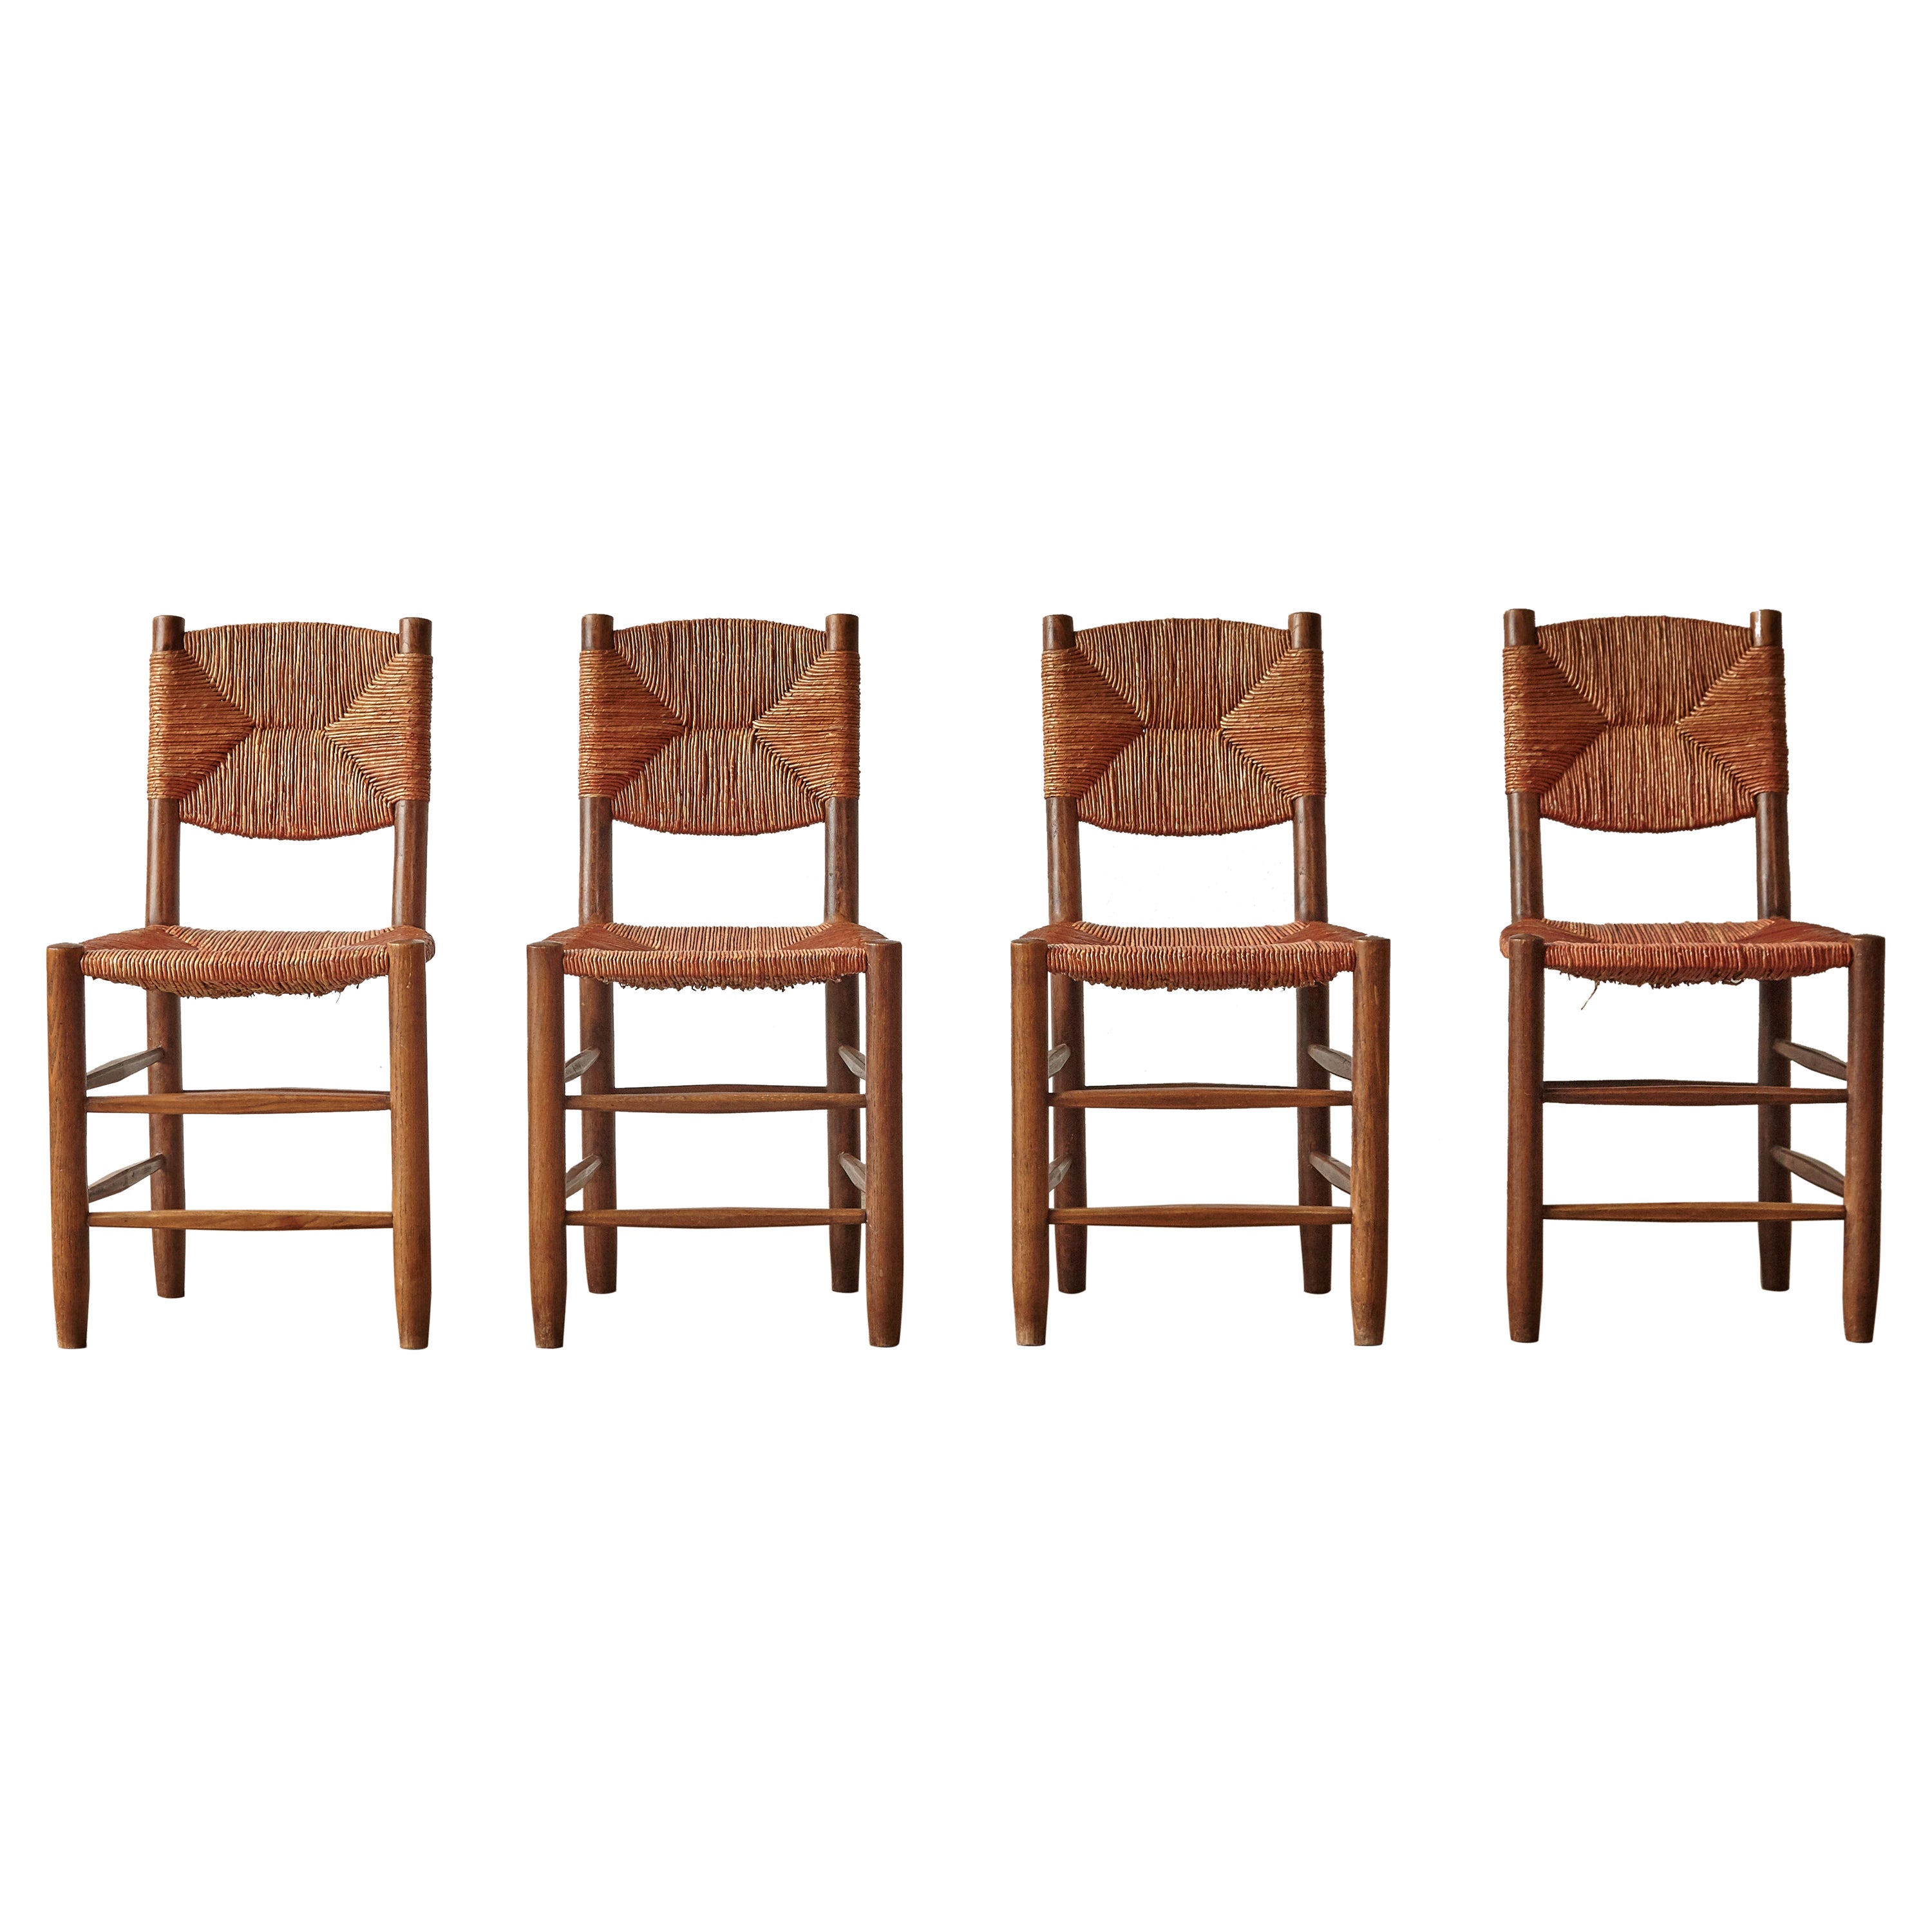 Superb Set of Early Charlotte Perriand Model 19 Bauche Chairs, France, 1950s/60s